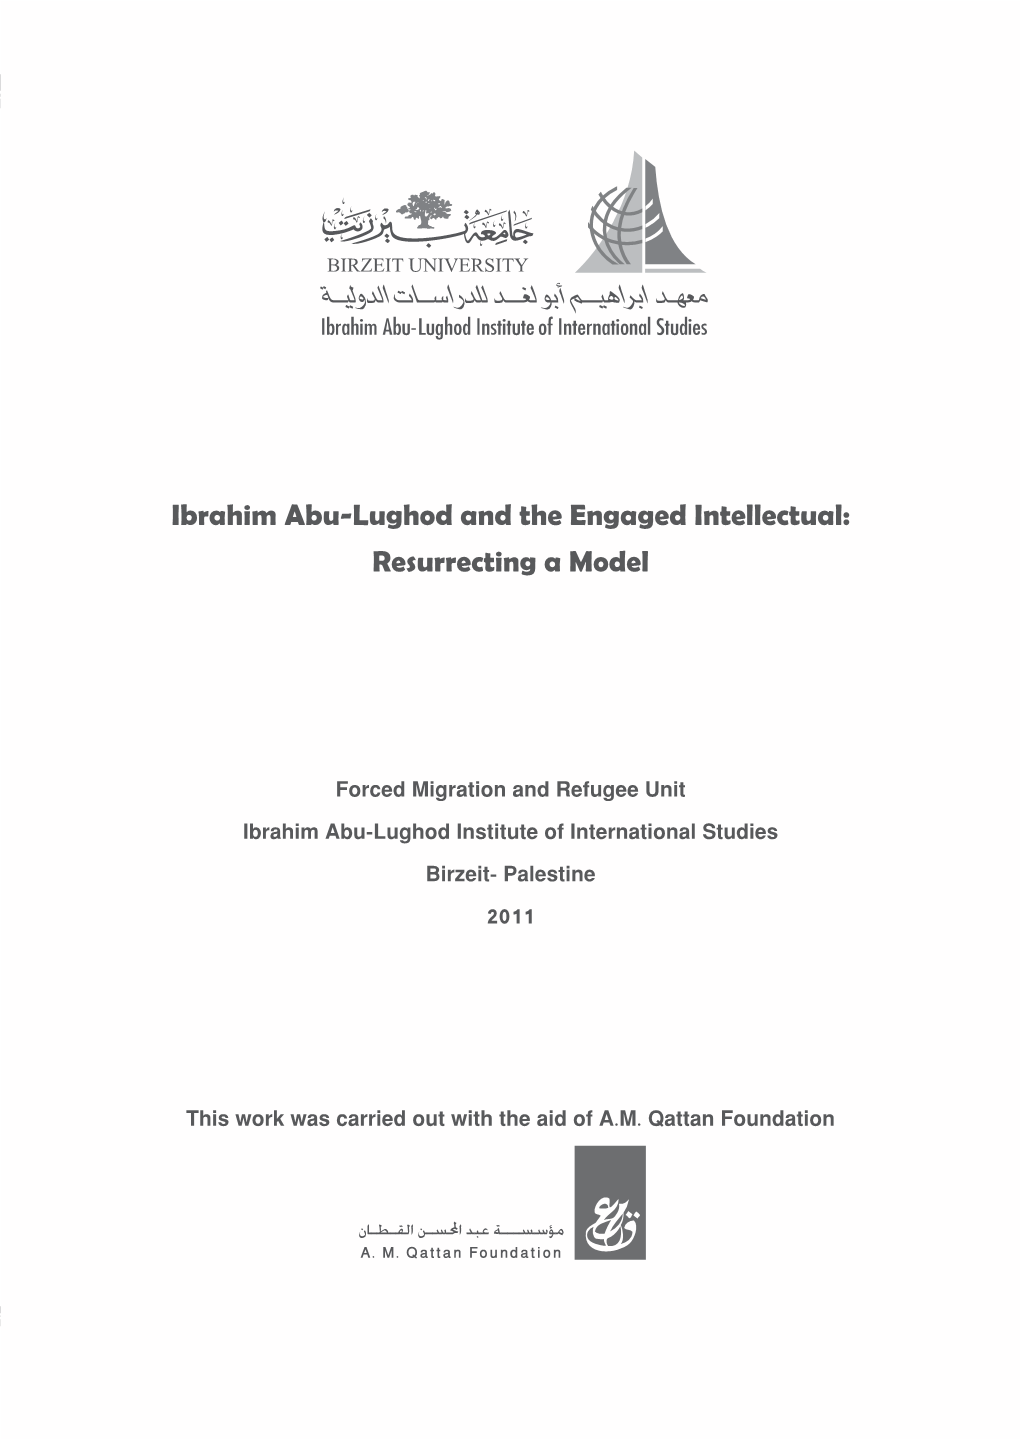 Ibrahim Abu-Lughod and the Engaged Intellectual: Resurrecting a Model